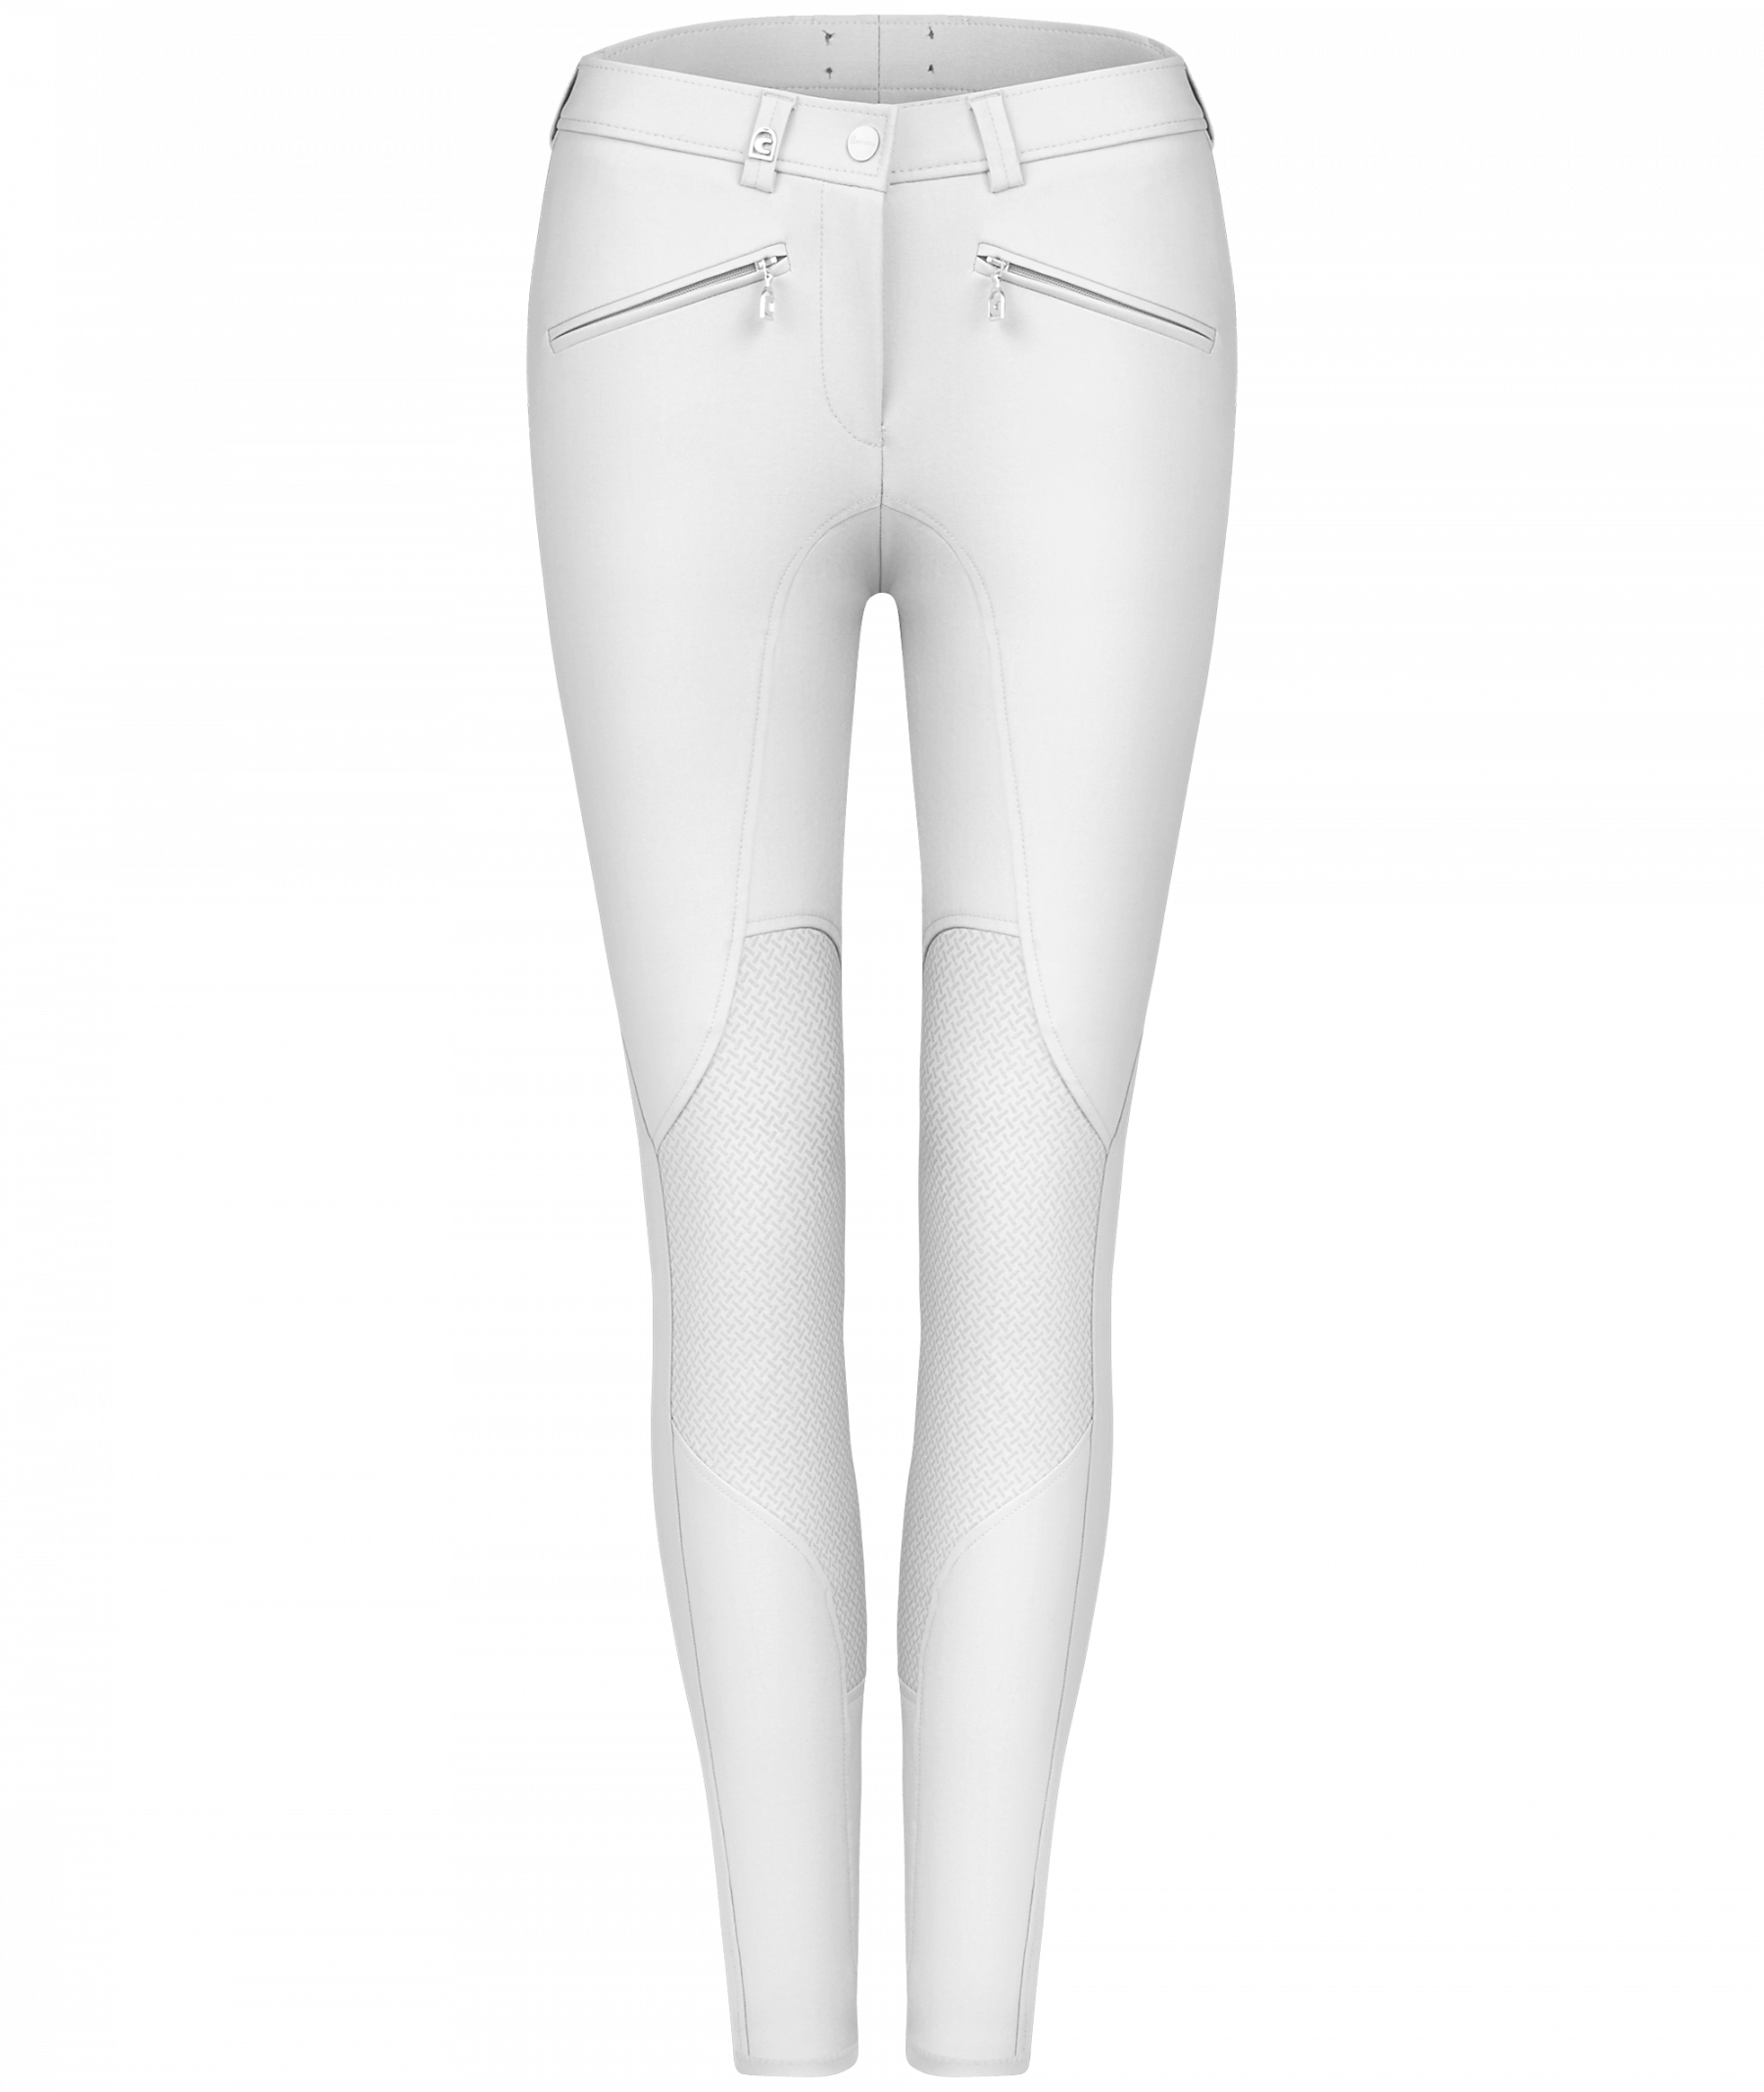 Jeans clipart article clothing, Jeans article clothing Transparent FREE ...